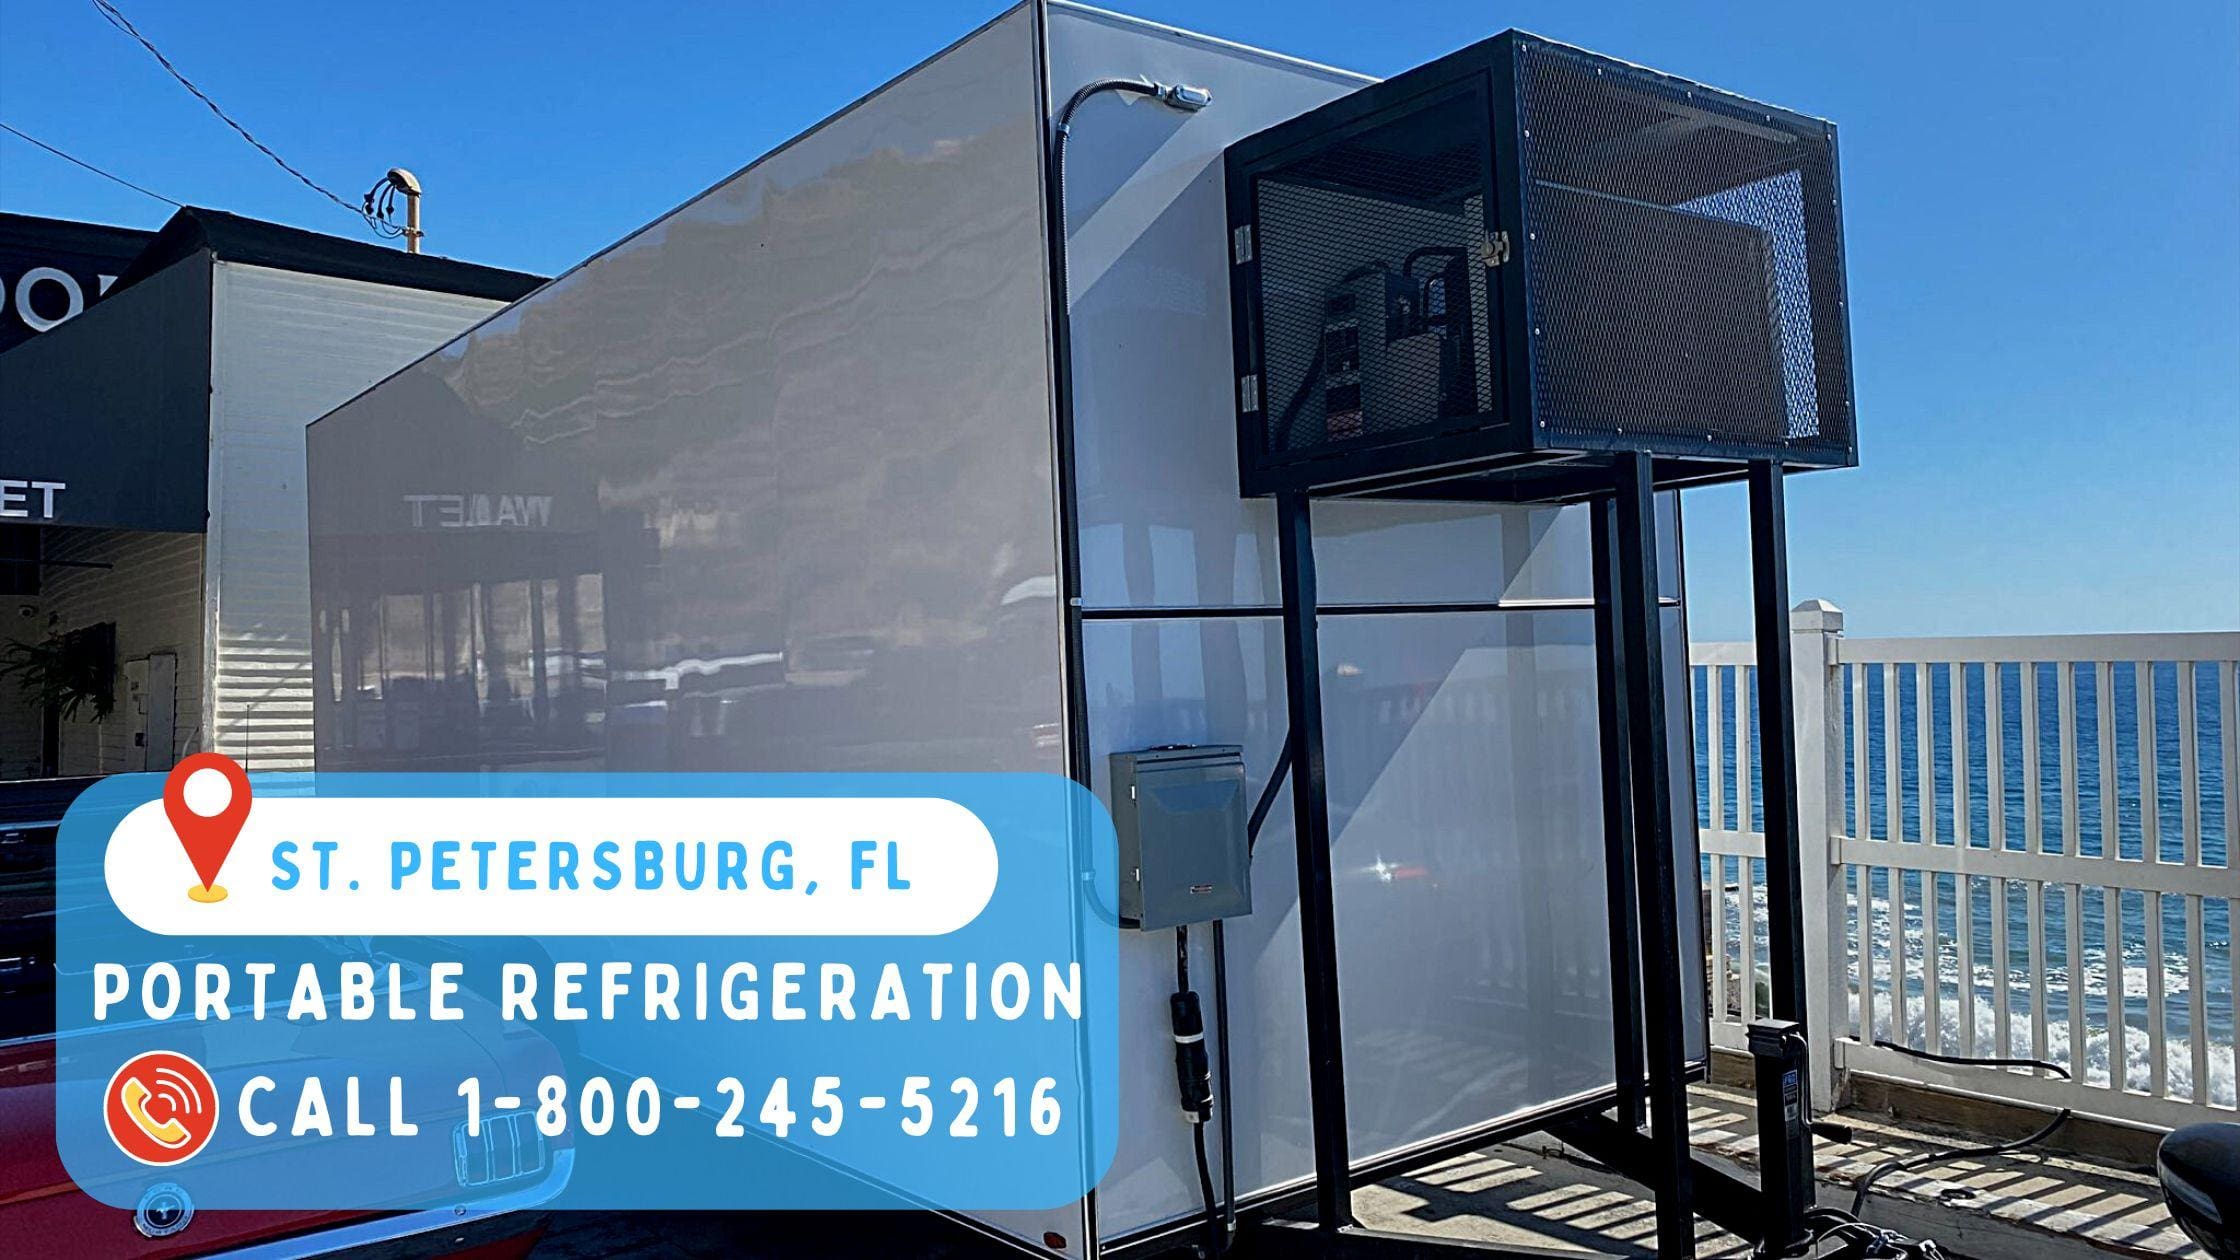 Portable refrigeration located in St. Petersburg